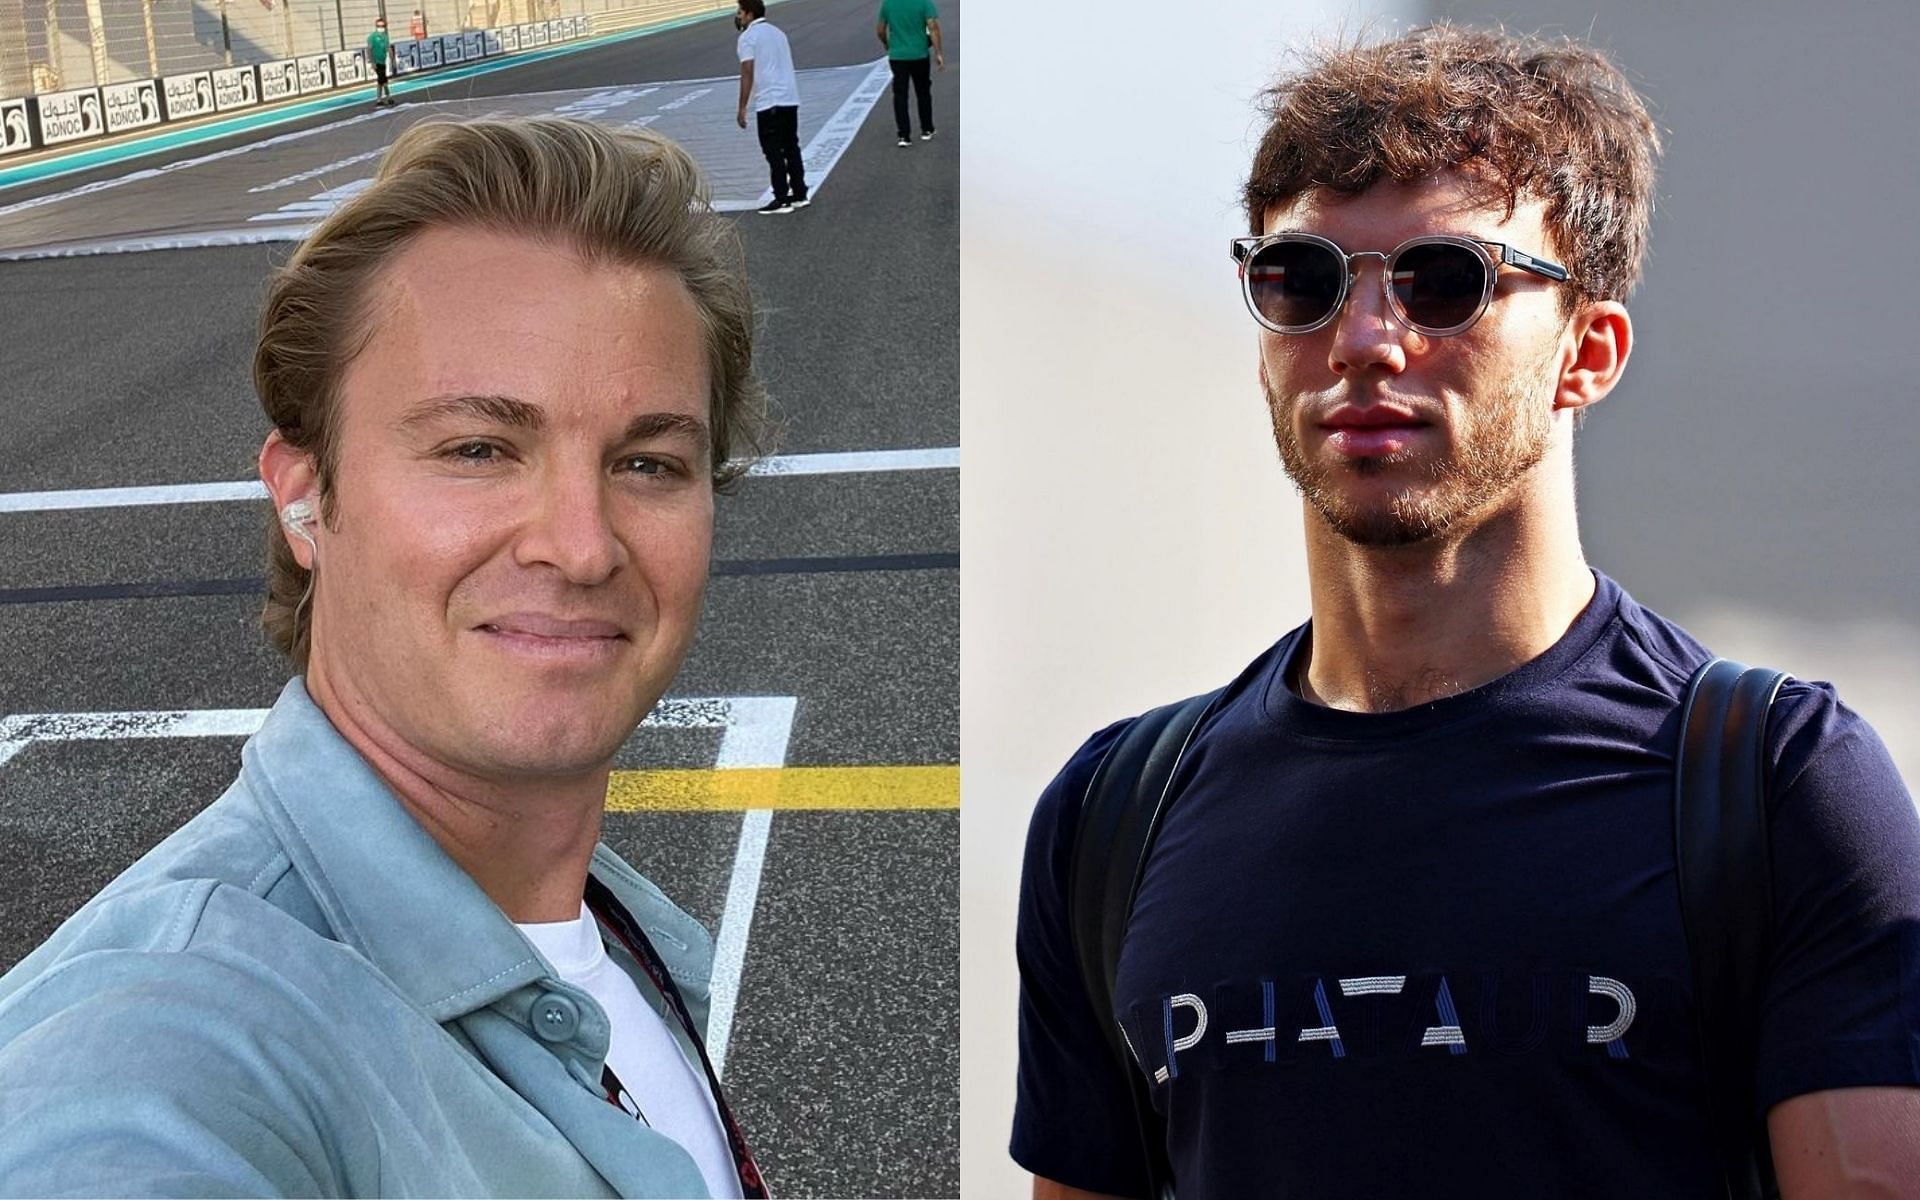 Nico Rosberg (left) and Pierre Gasly (right) (Image Courtesy: @nicorosberg and @pierregasly on Instagram)